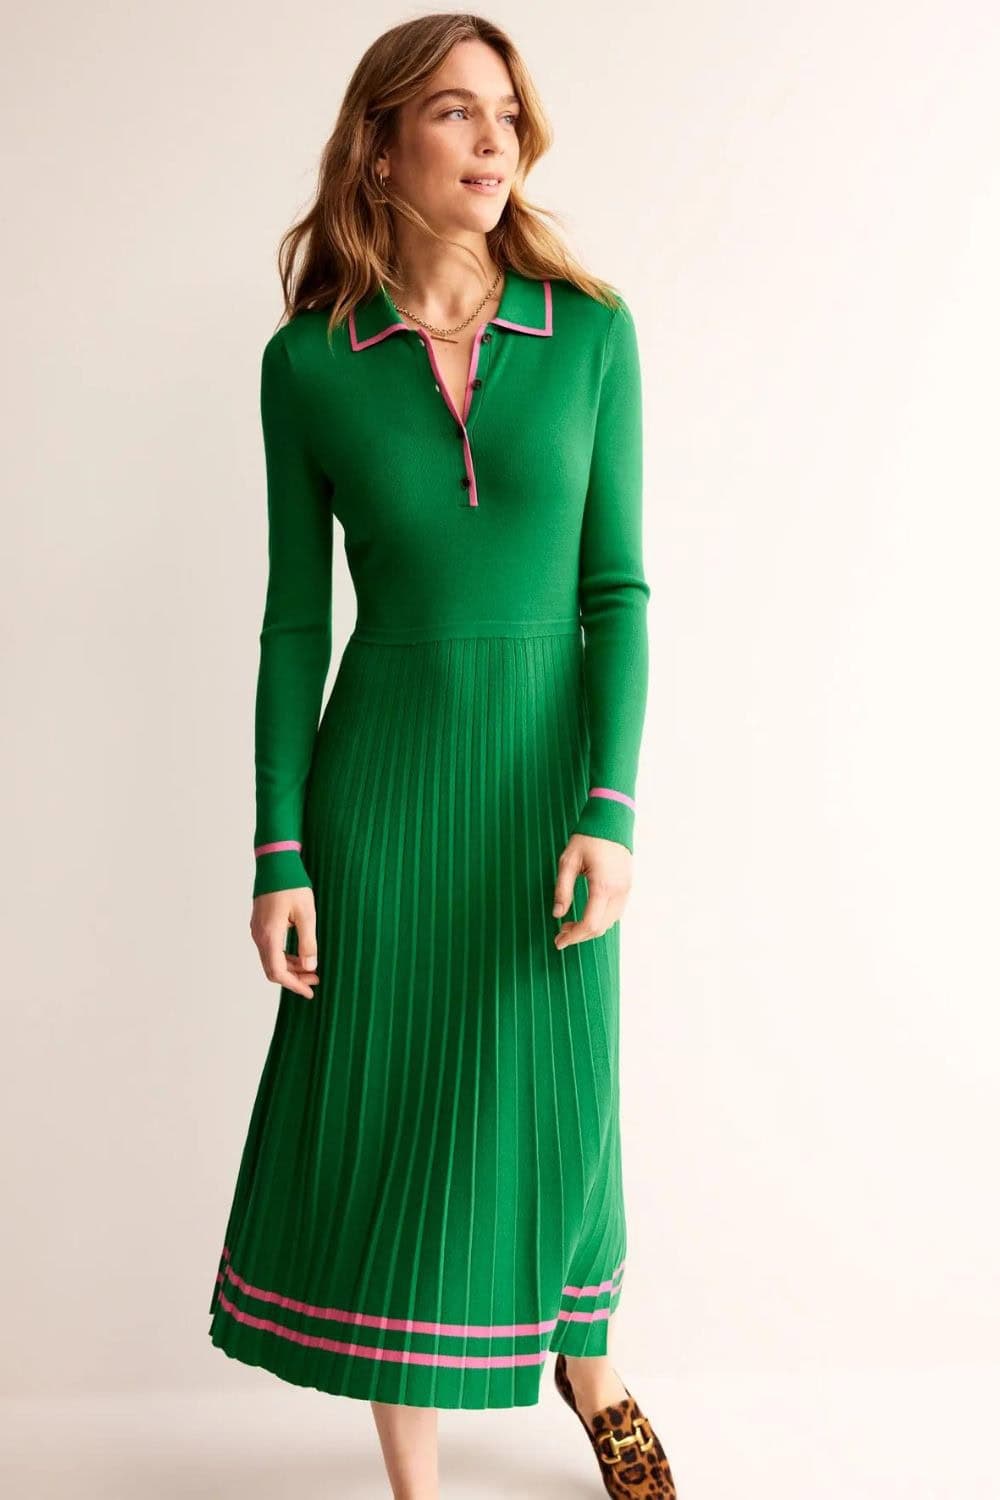 Mollie Pleated Knitted Dress